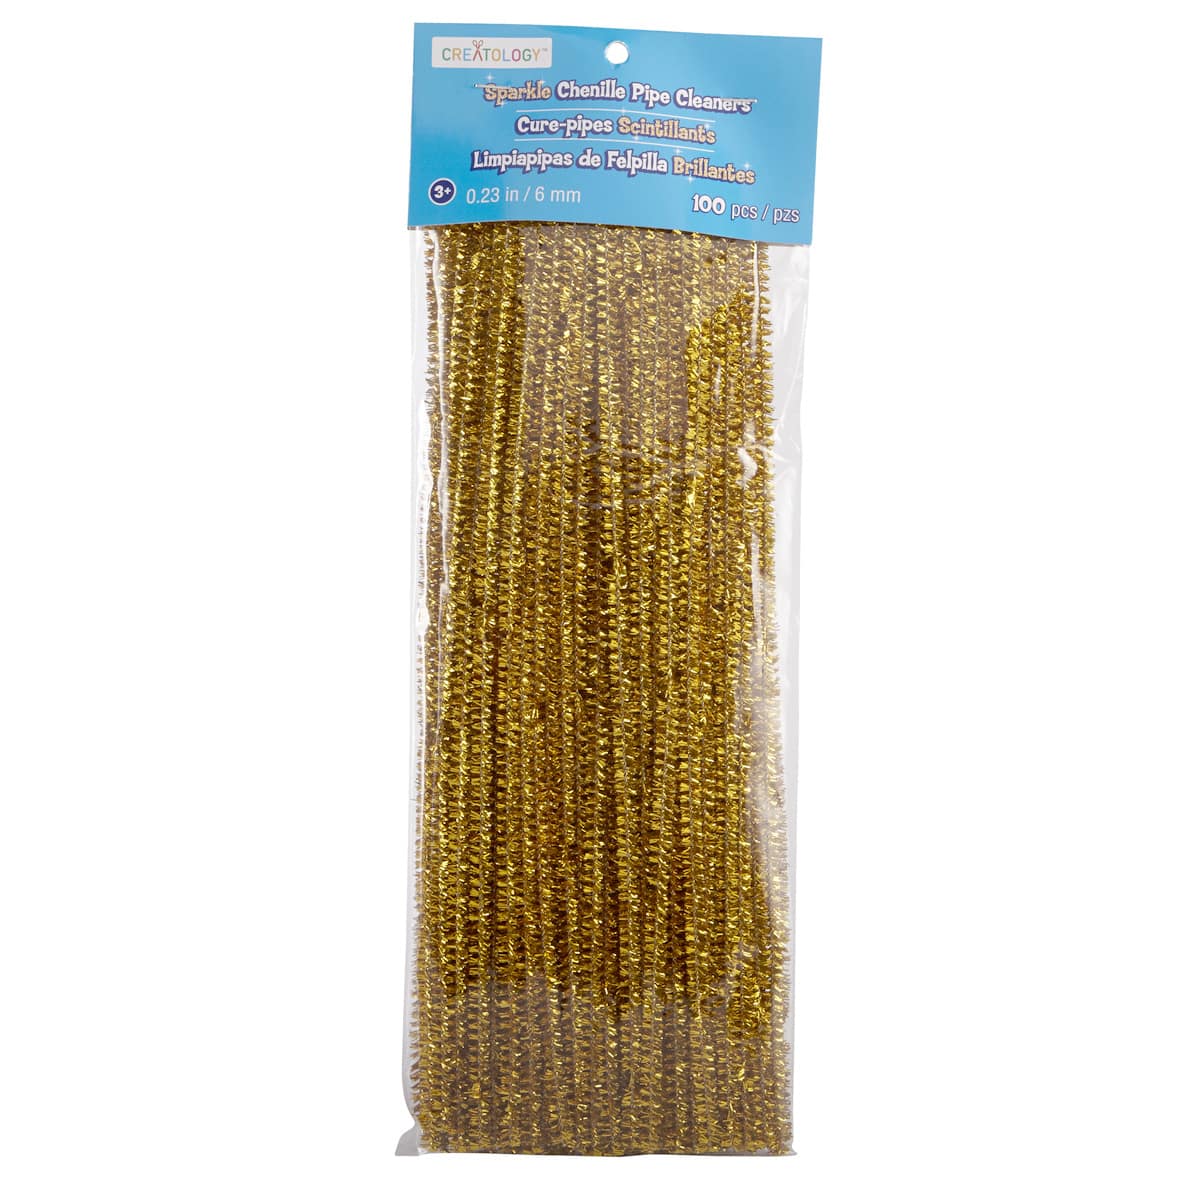 12 Packs: 100 ct. (1,200 total) Gold Glitter Chenille Pipe Cleaners by Creatology&#x2122;